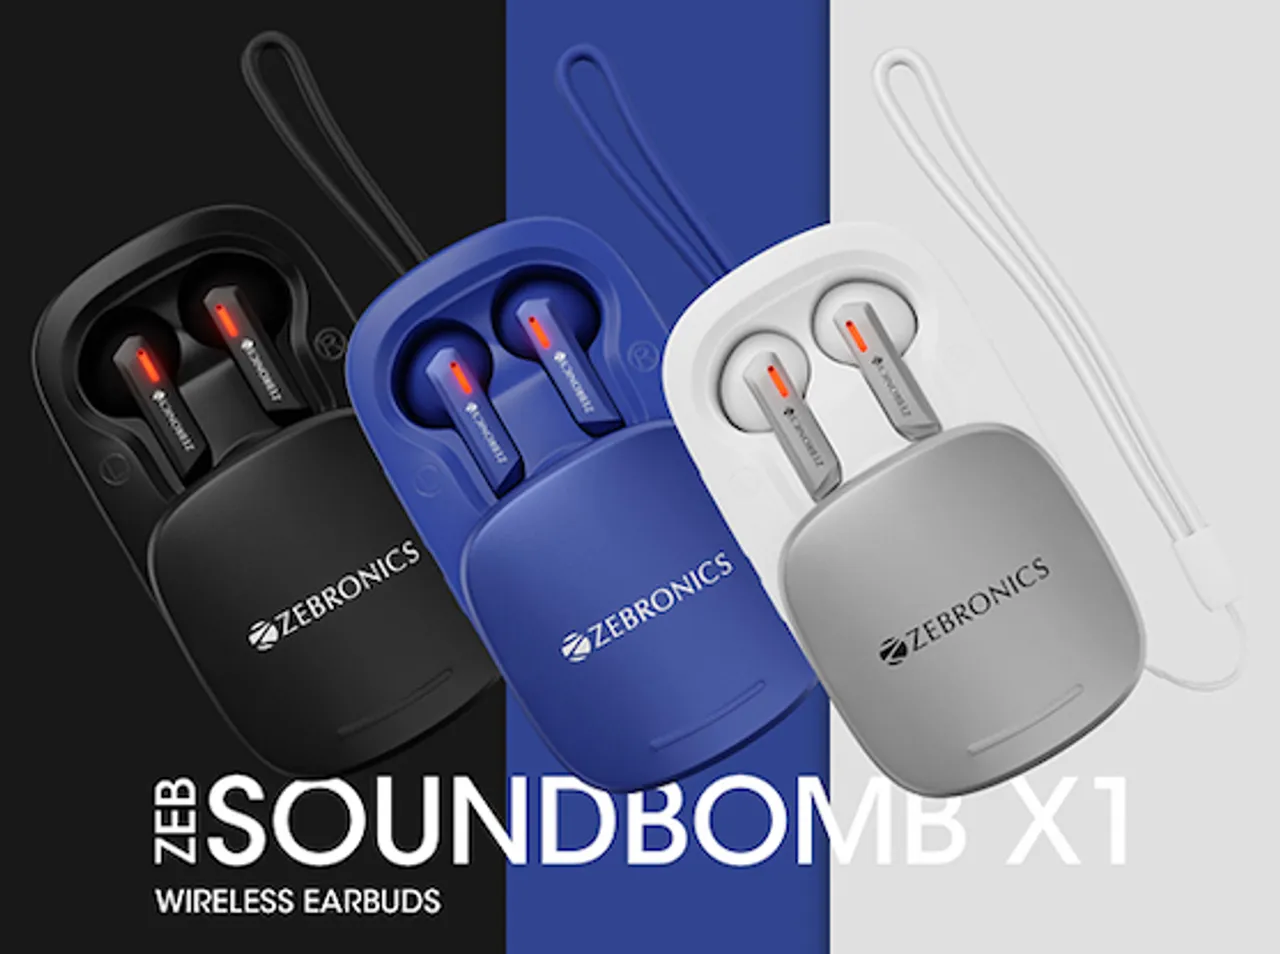 Zebronics Introduced 3-in 1 ZEB-Sound Bomb X1 in India